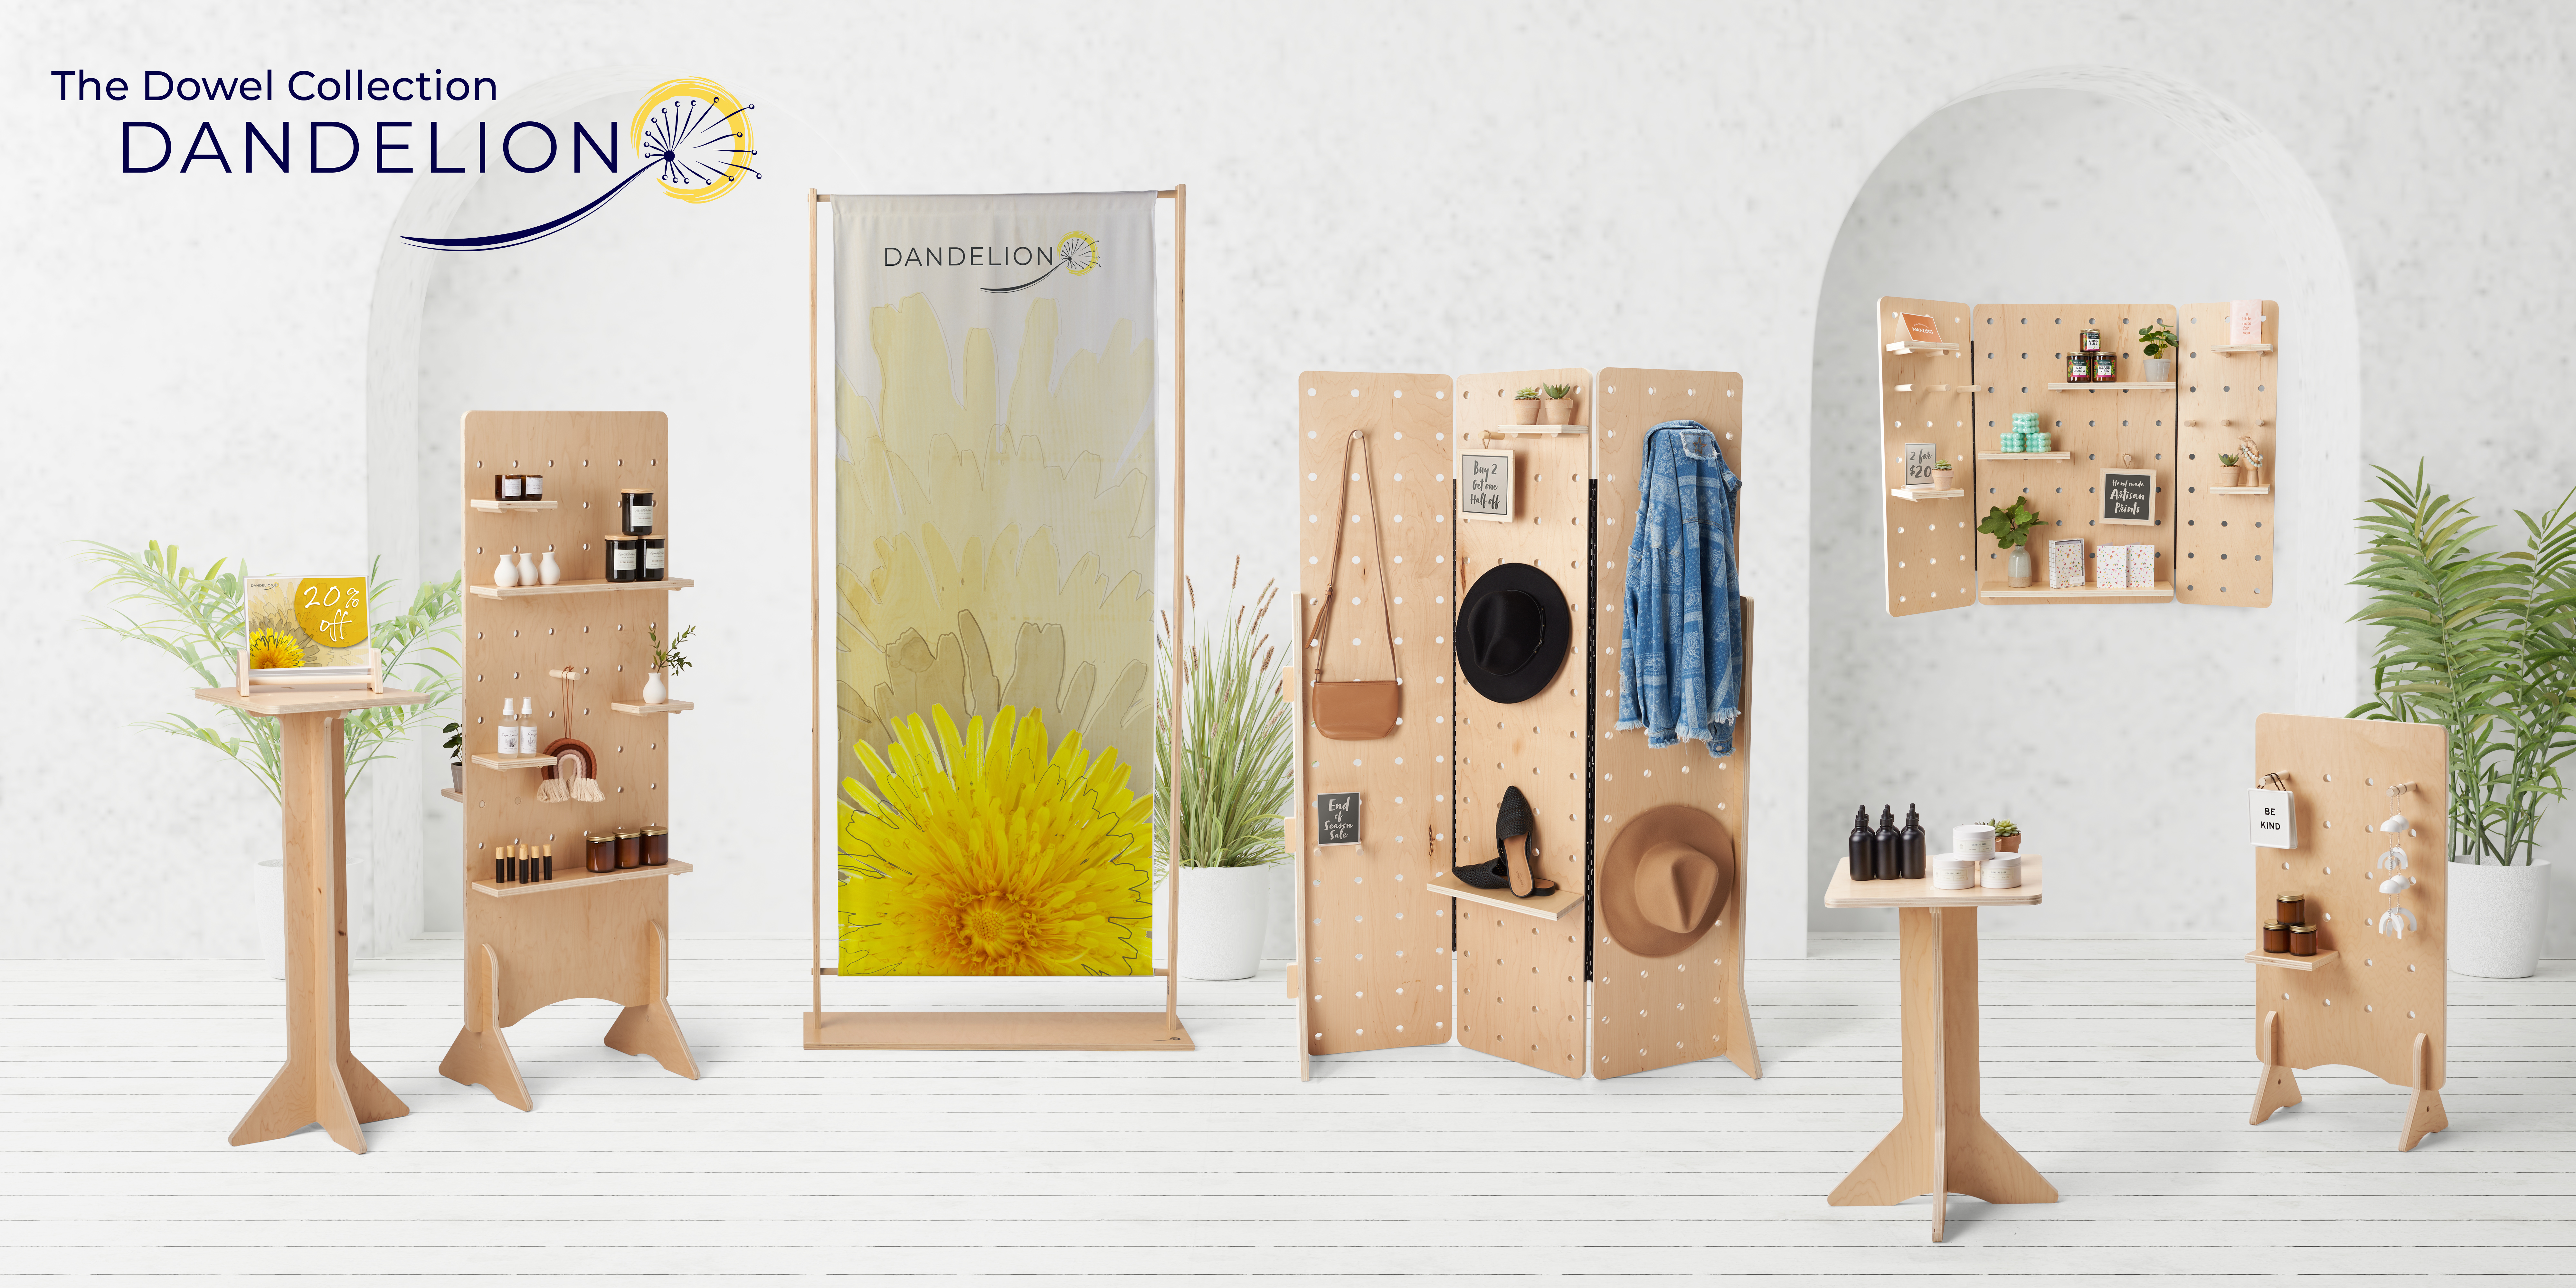 Dandelion collection with eco-friendly materials